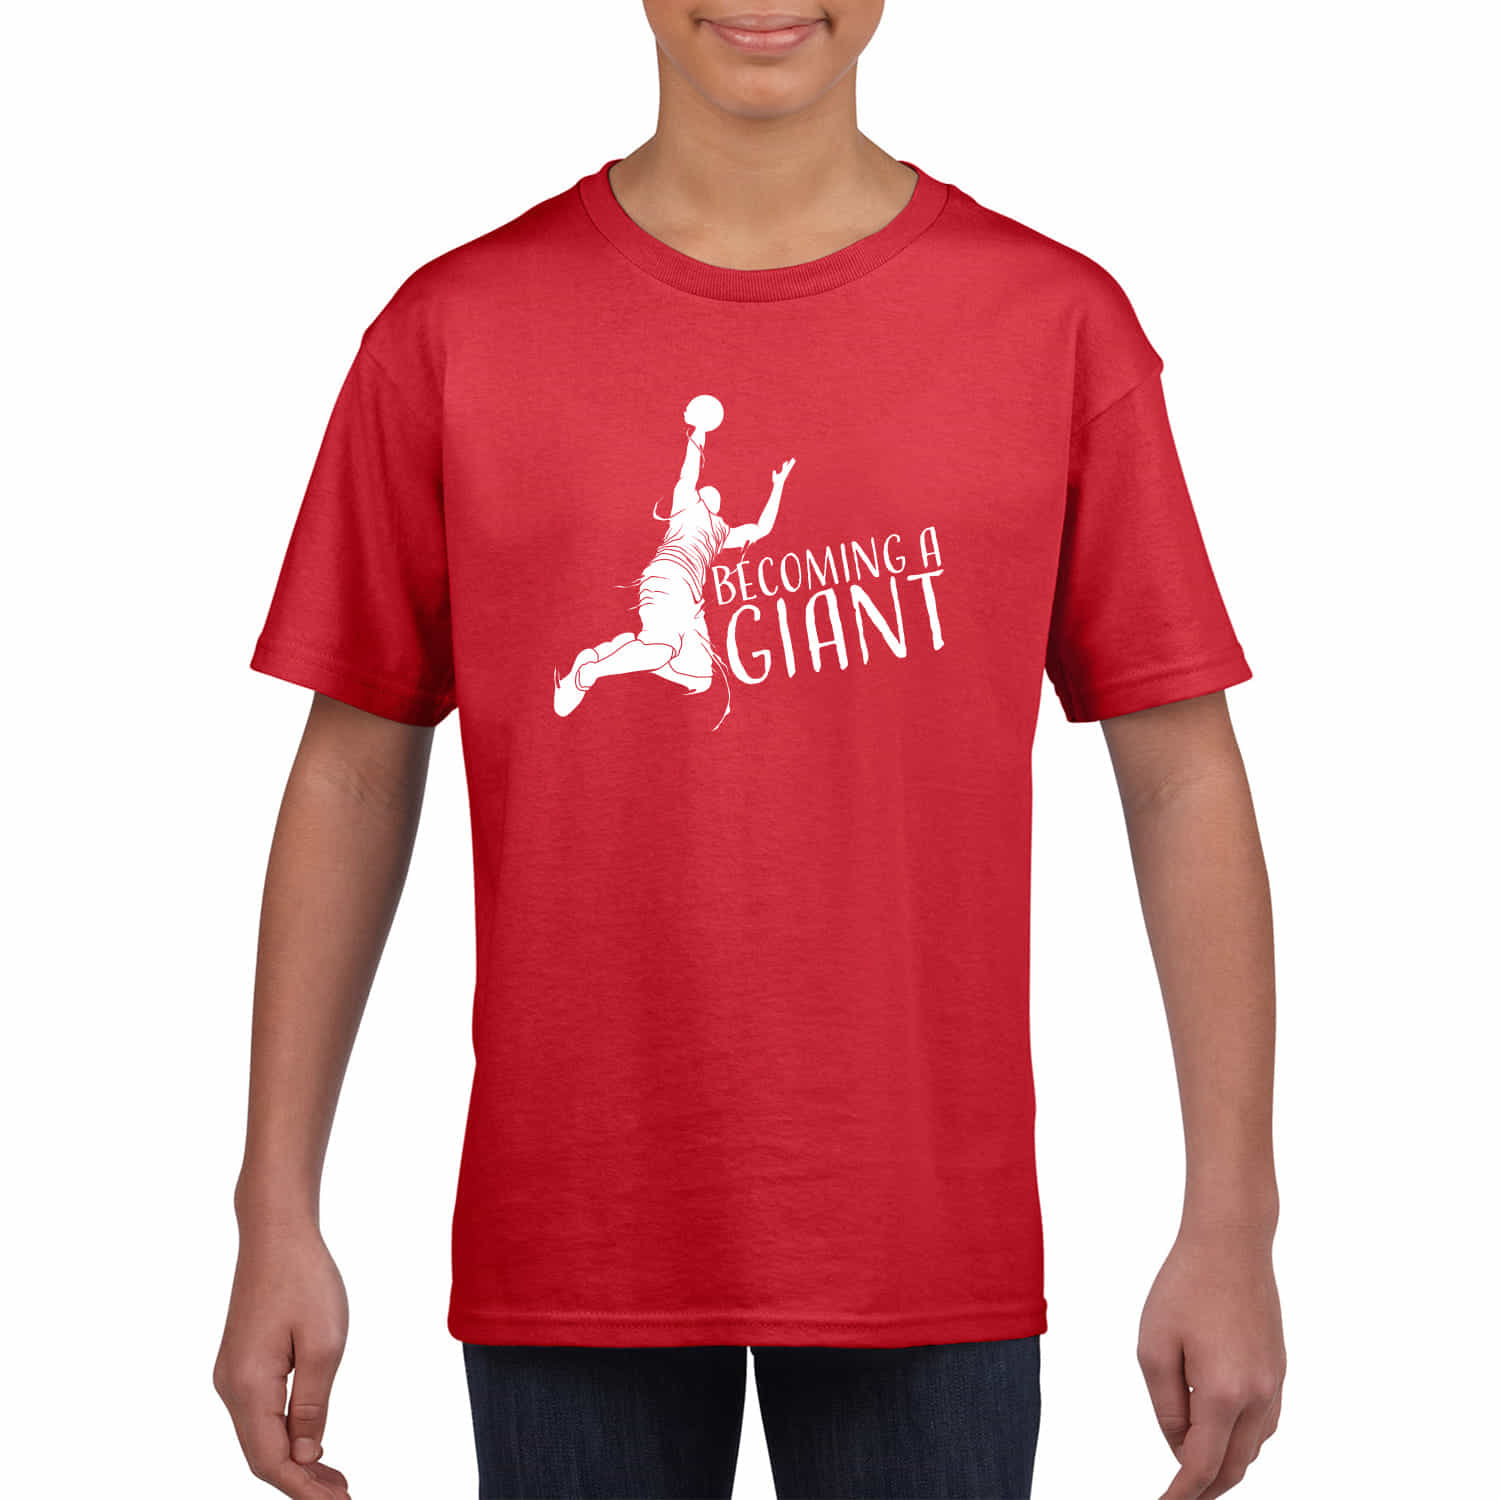 Kinder T-Shirt "Becoming a Giant"